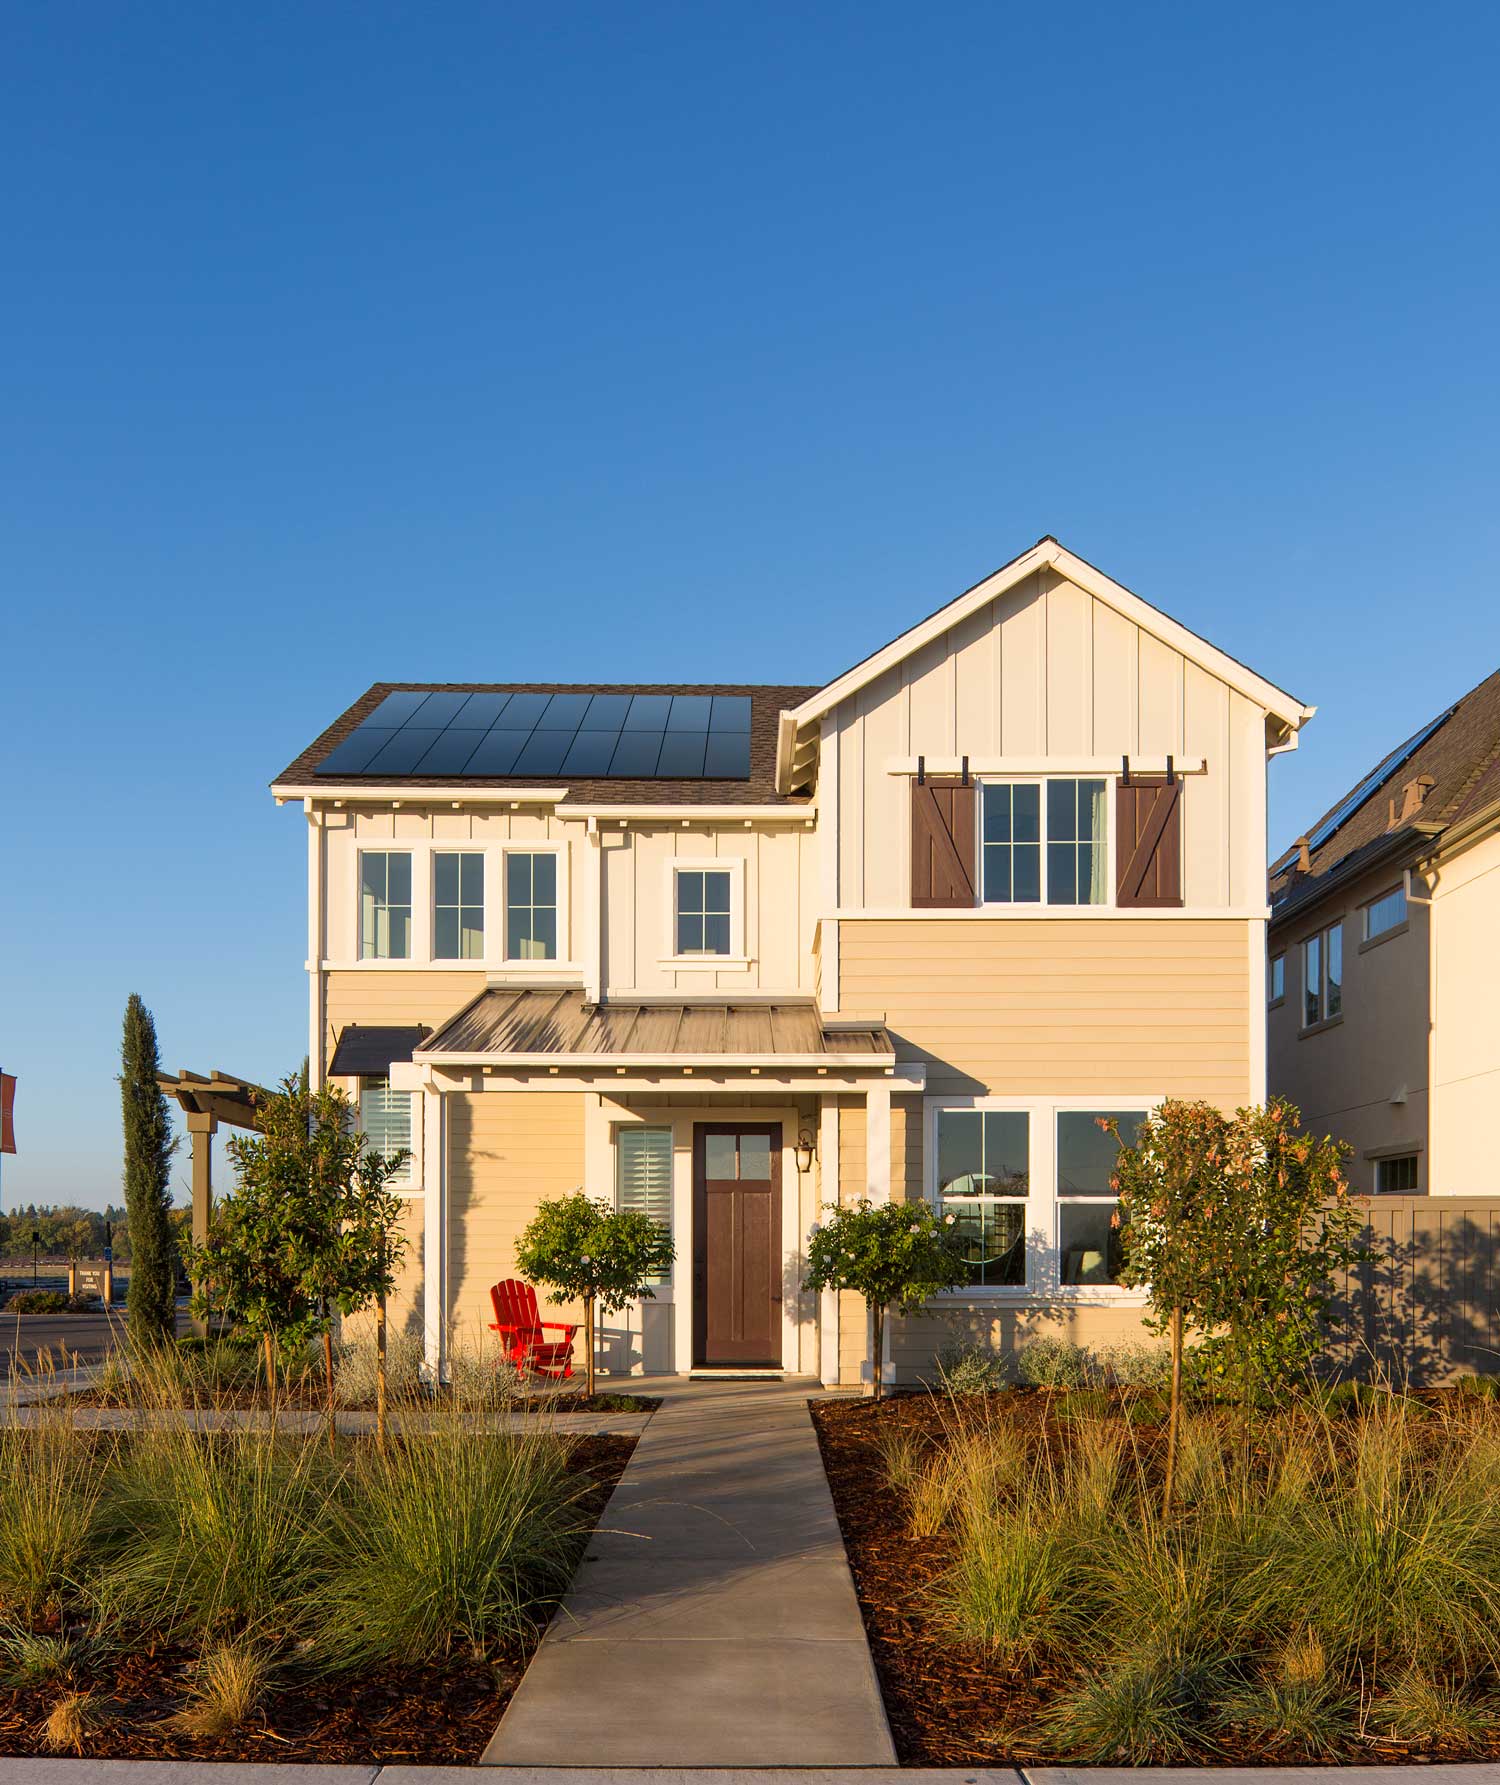 SunPower by Custom Energy provided the solar panels for this beautiful, yellow home in Utah.